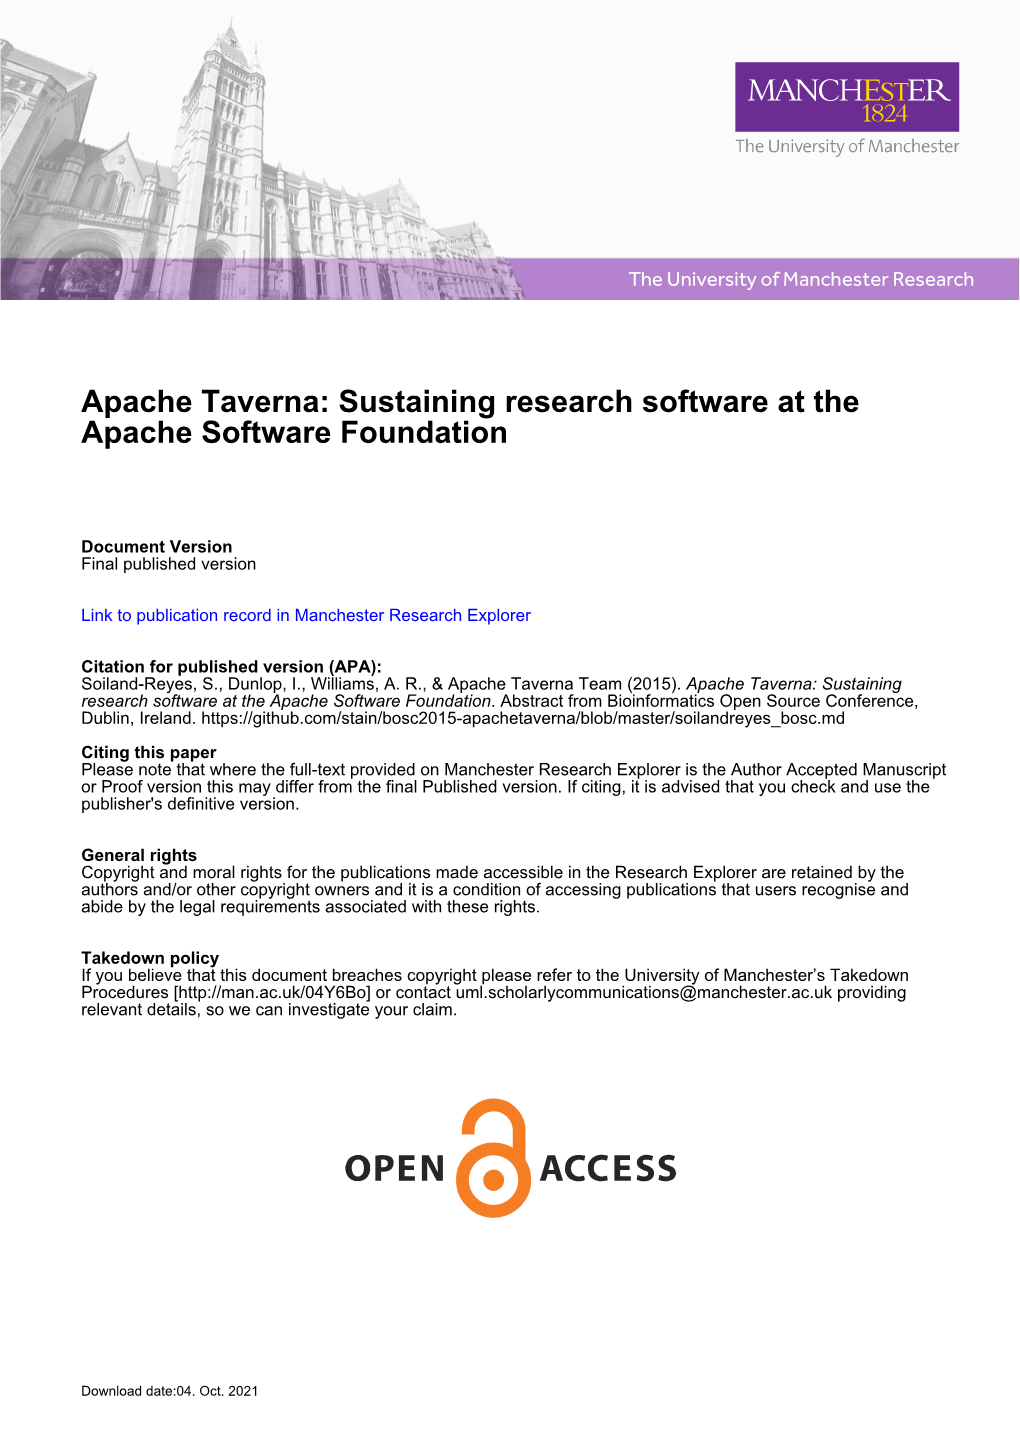 Apache Taverna: Sustaining Research Software at the Apache Software Foundation